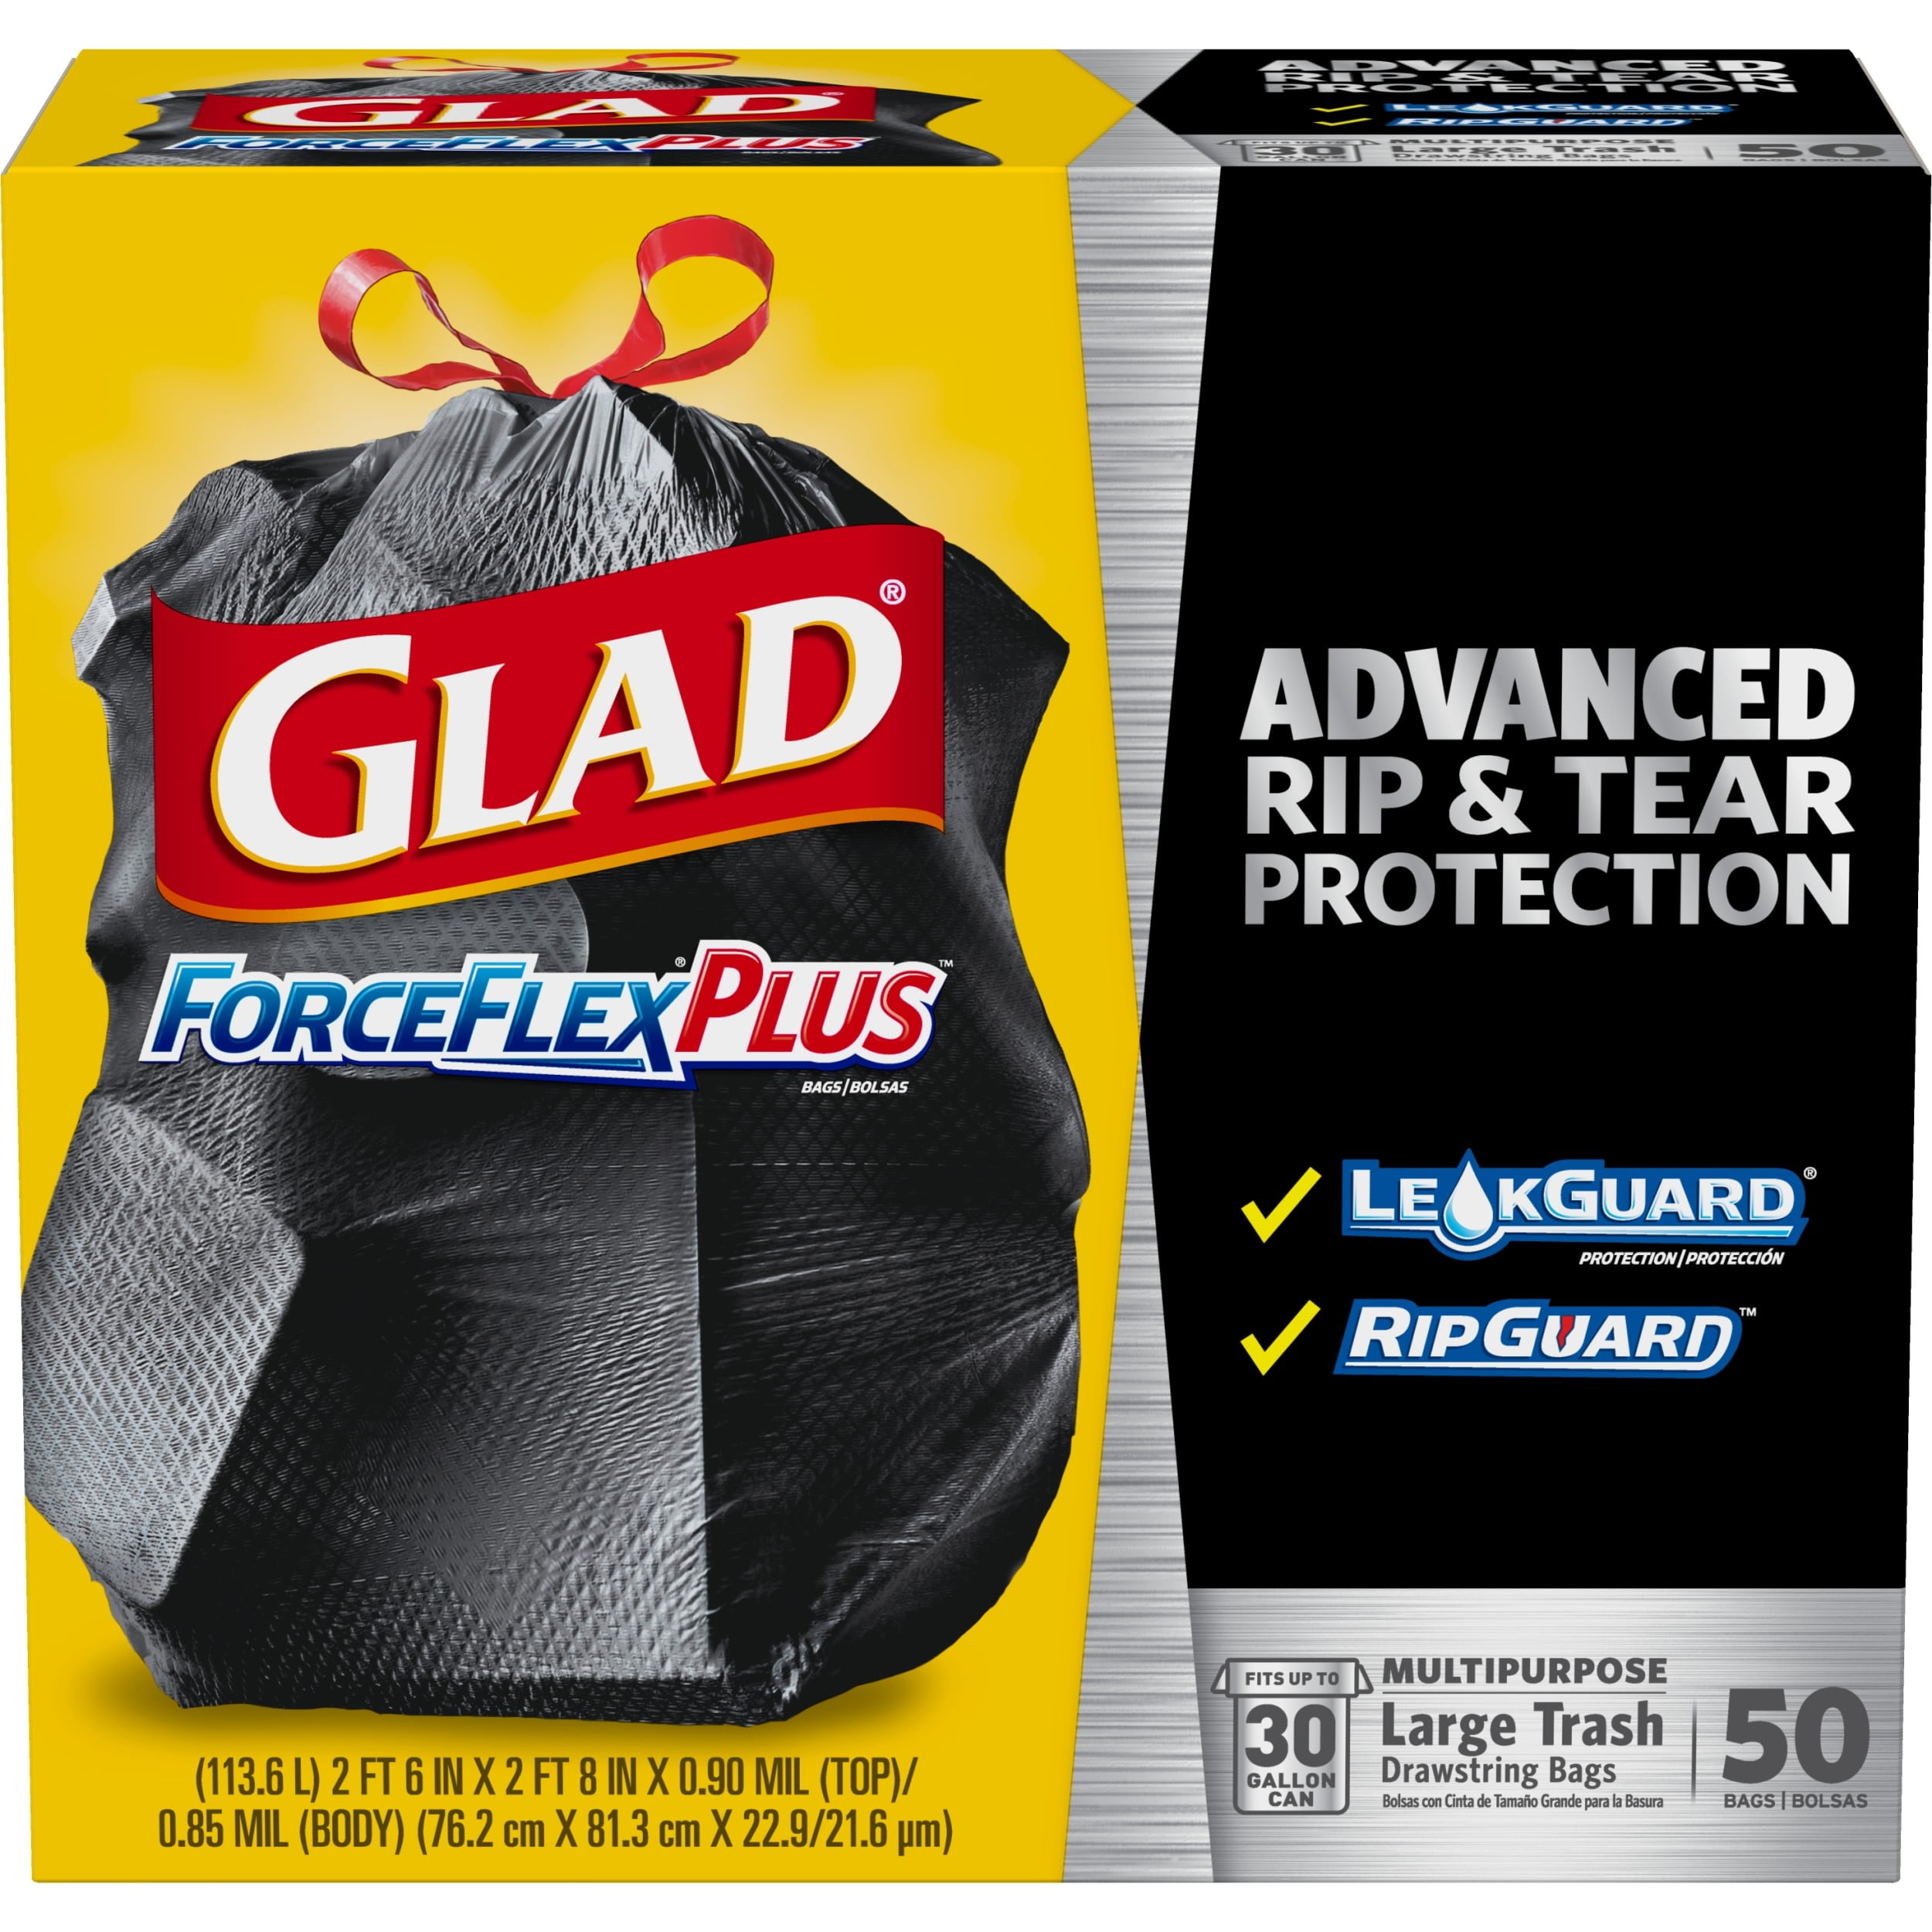 Glad ForceFlex scented trash bags aren't just about tackling trash, they're  a fun and easy way to boost your mood in the new year with…